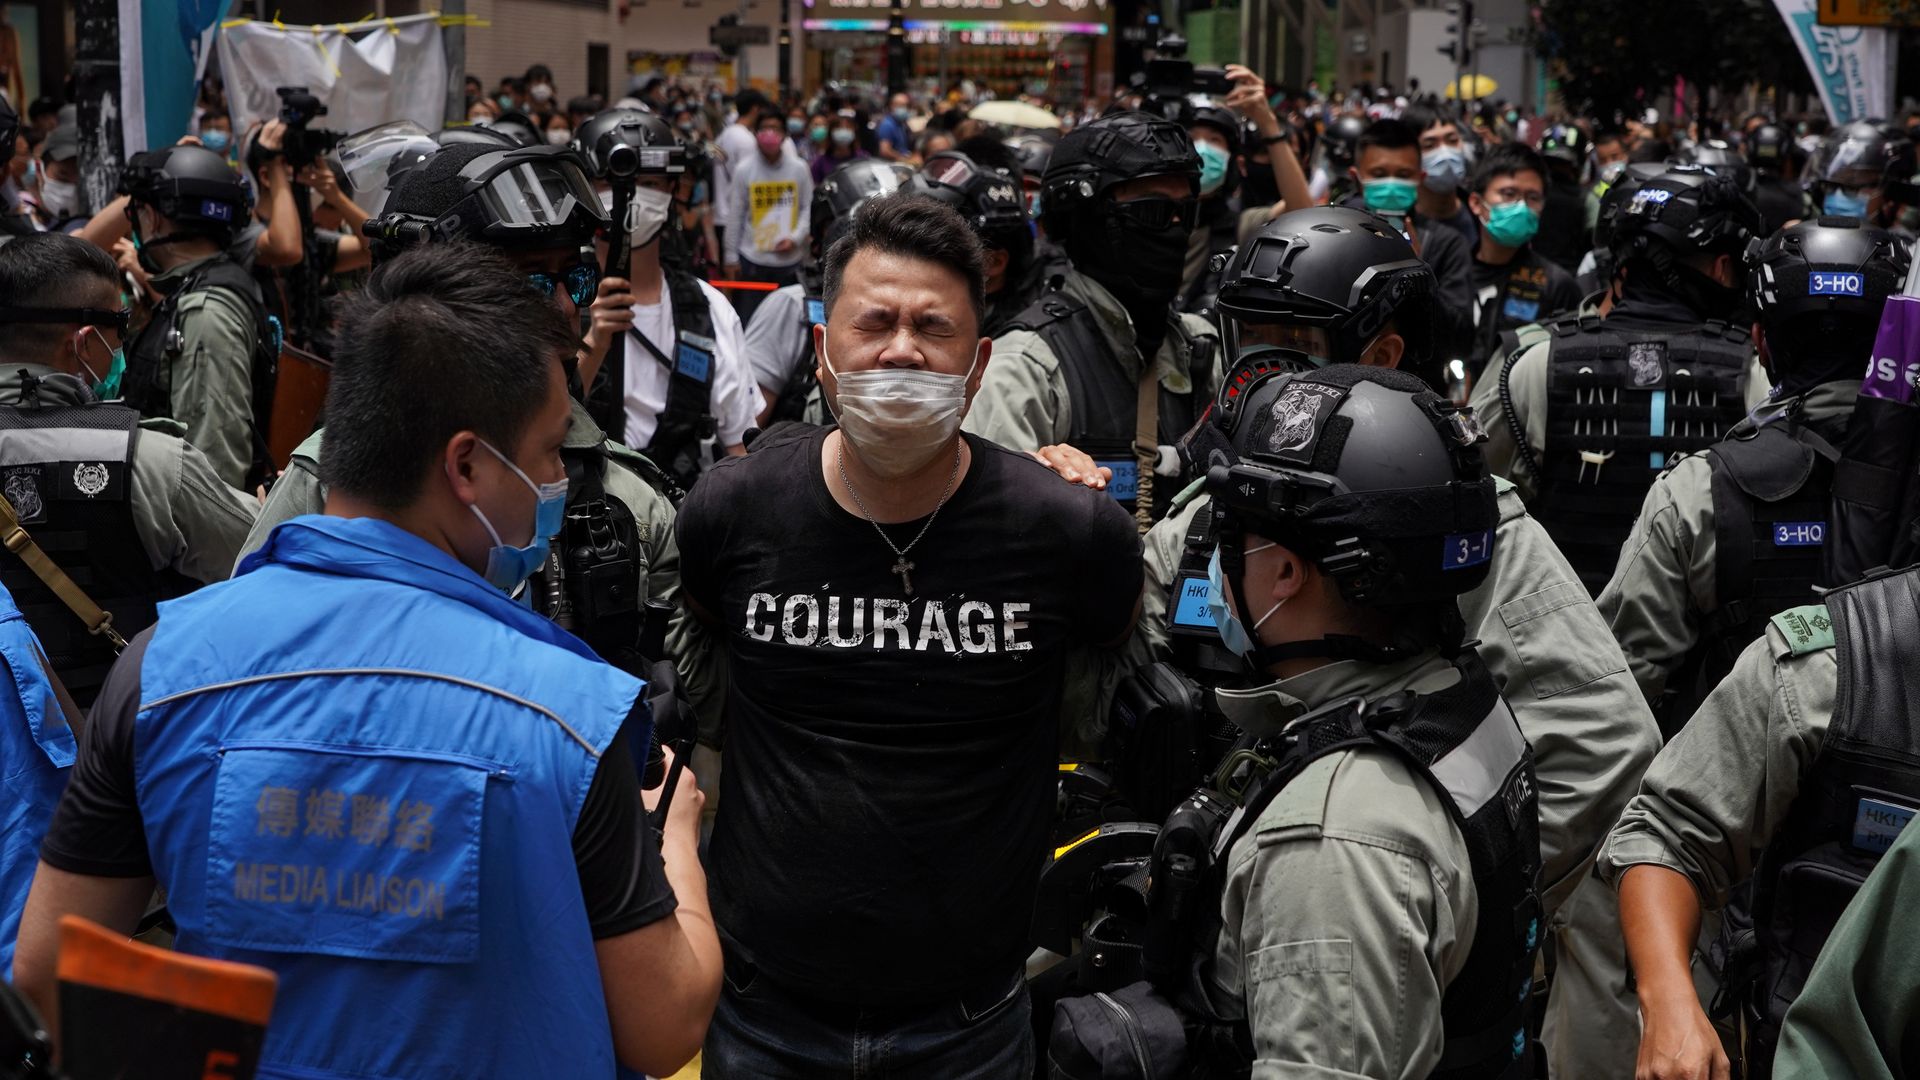 A pro-democracy lawmaker in Hong Kong is arrested by police during a protest